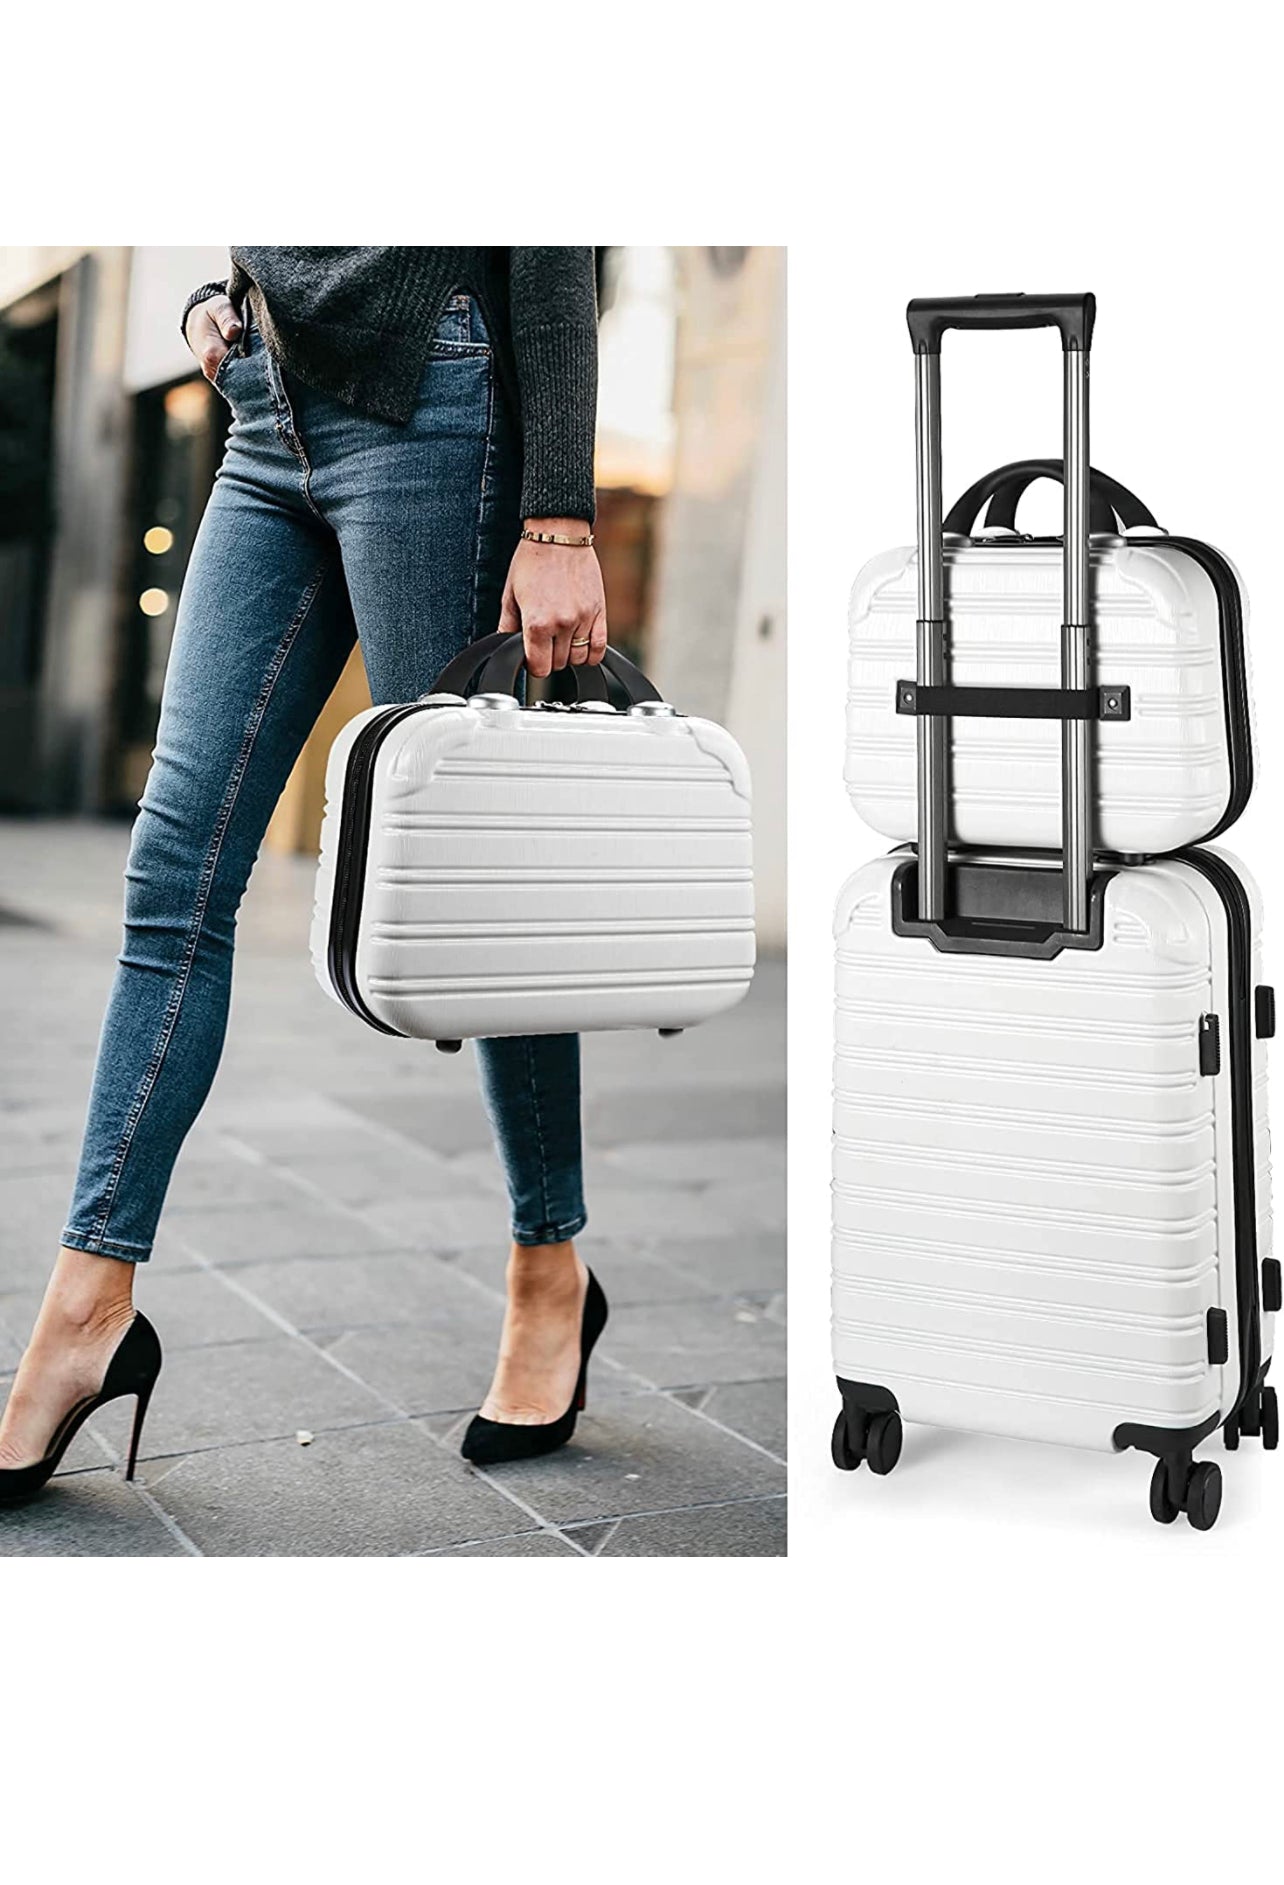 Carry on Luggage 20" Suitcase 14" Mini Cosmetic Cases Luggage Sets Hardside PC ABS Lightweight USB Suitcase with Wheels TSA 2 Piece Set 14/20 - MyTravelShop.ca